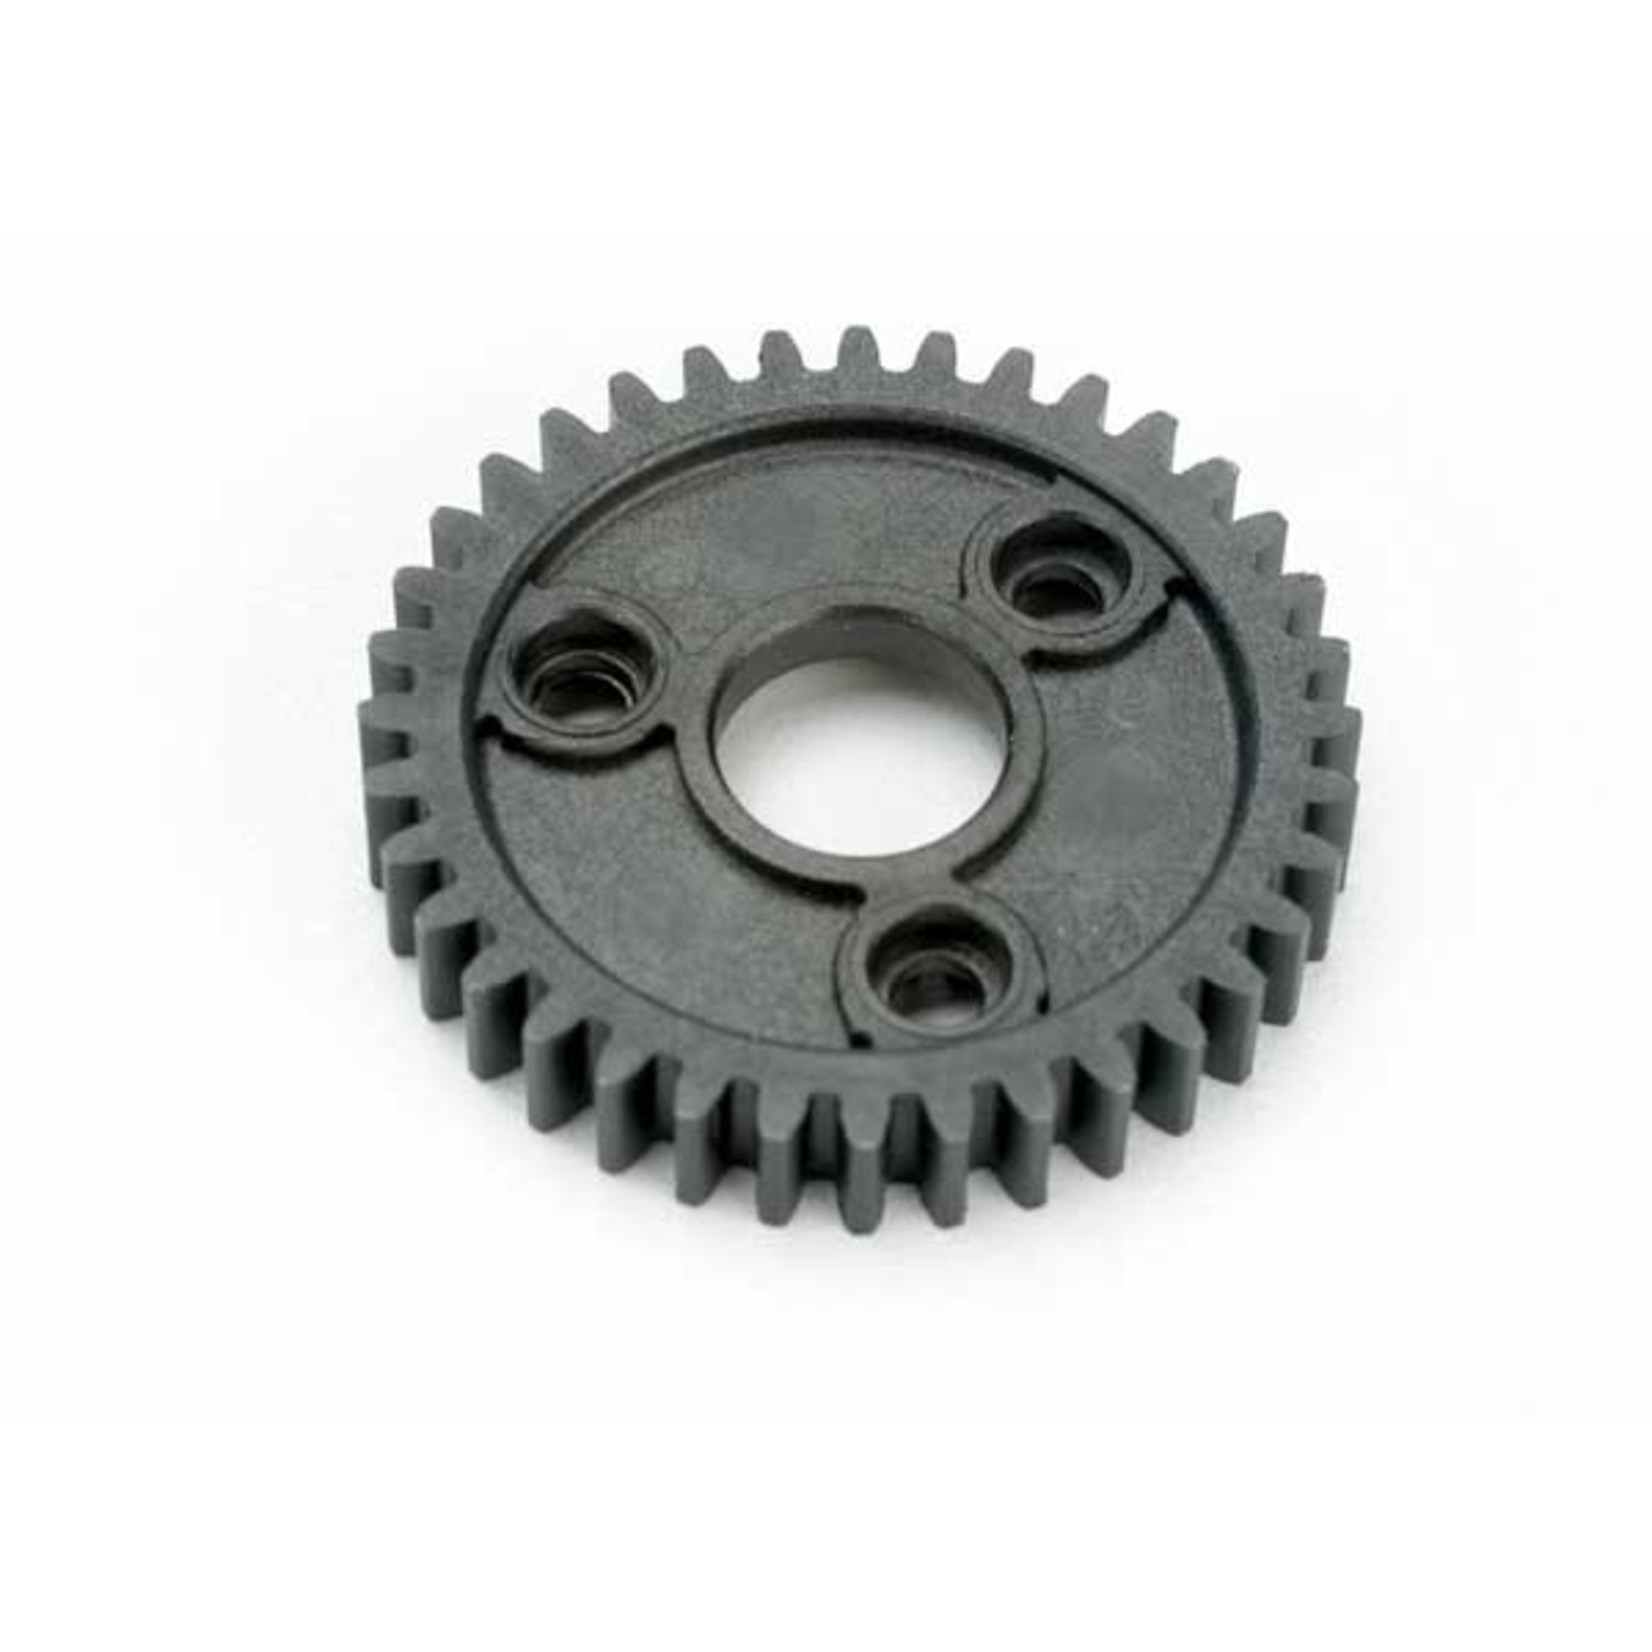 Traxxas 3953 - Spur gear, 36-tooth (1.0 metric pitch)